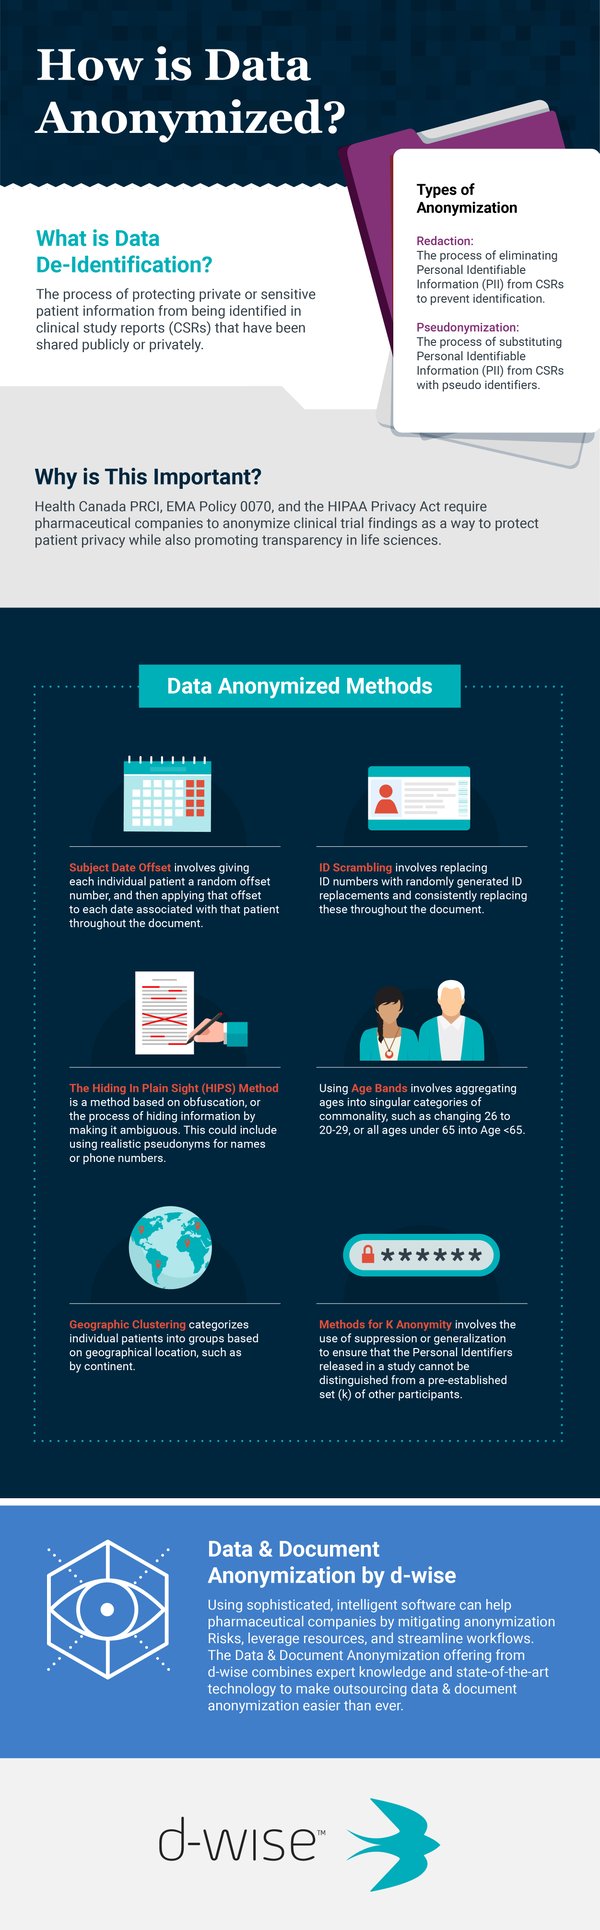 How is Data Anonymized_Infographic